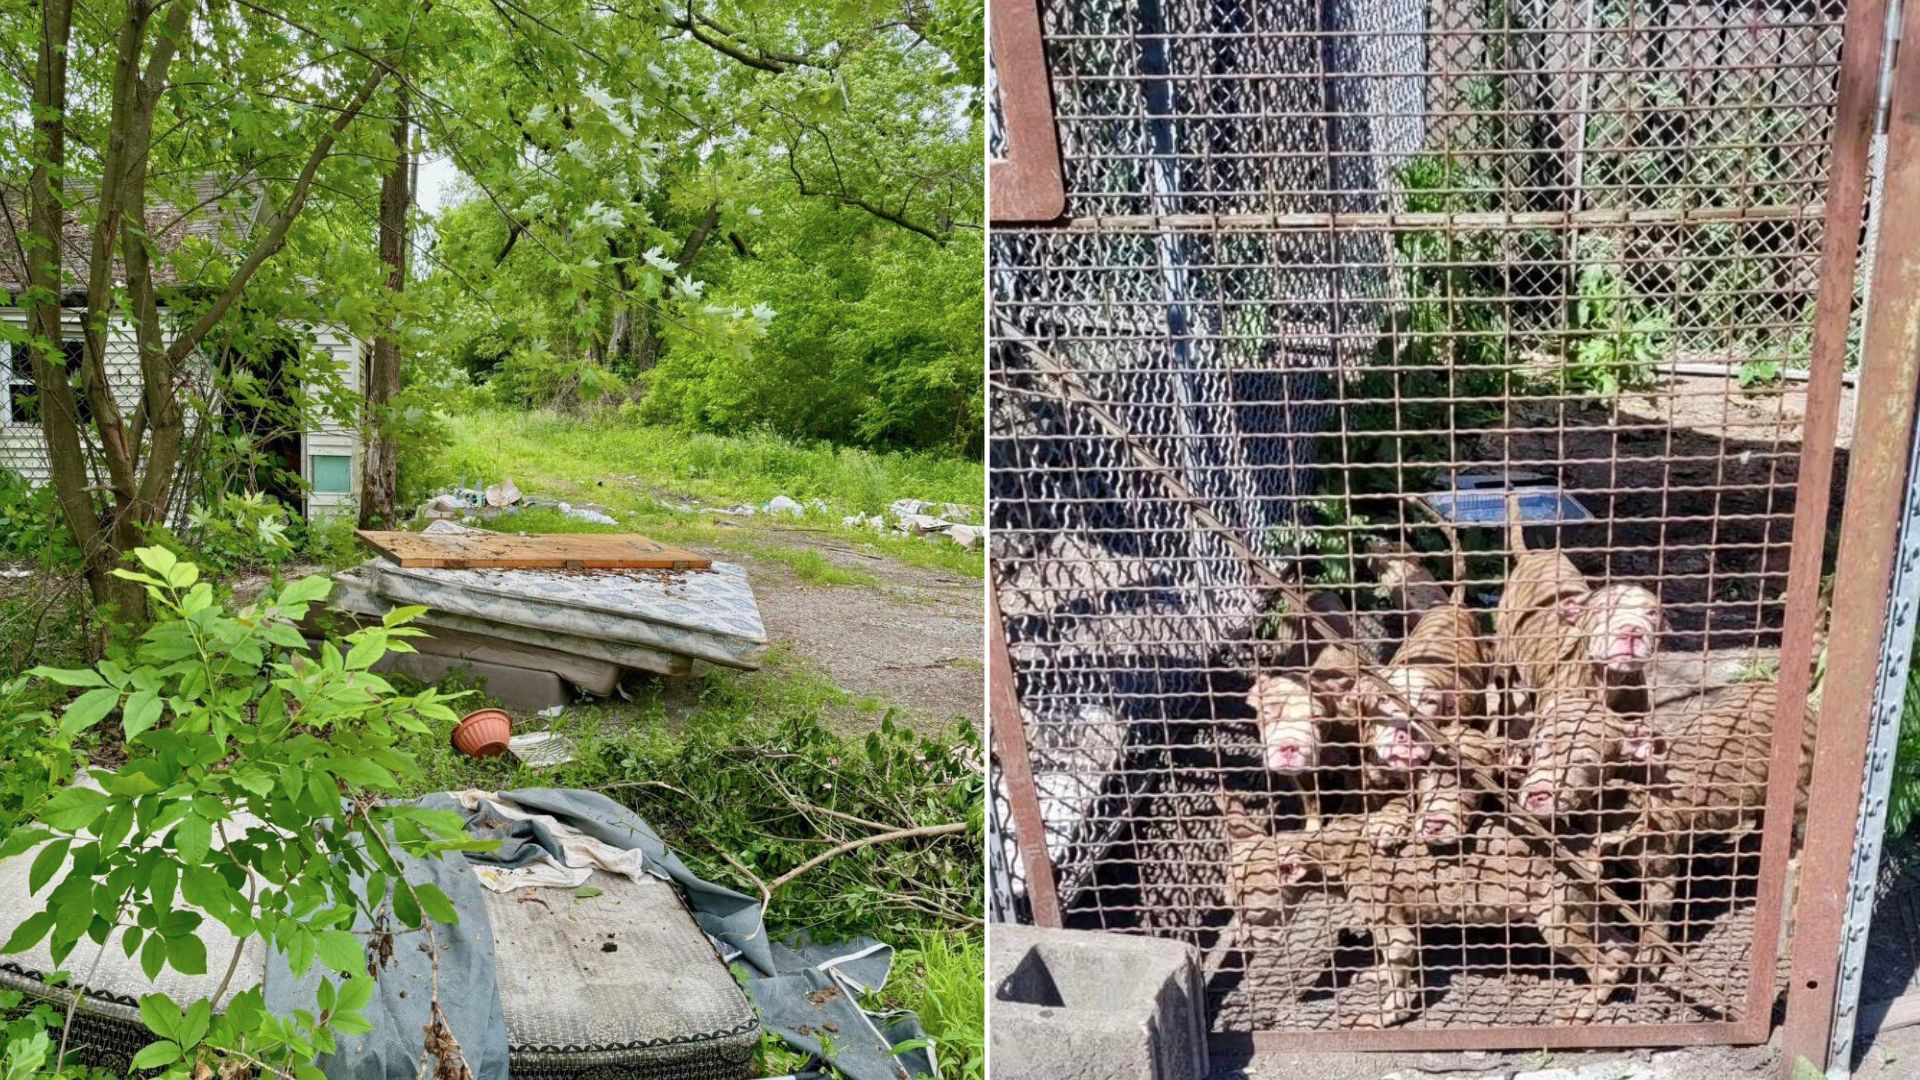 Man’s Heart Broke When He Found A Litter Of Abandoned Puppies On Thrown-Out Mattress